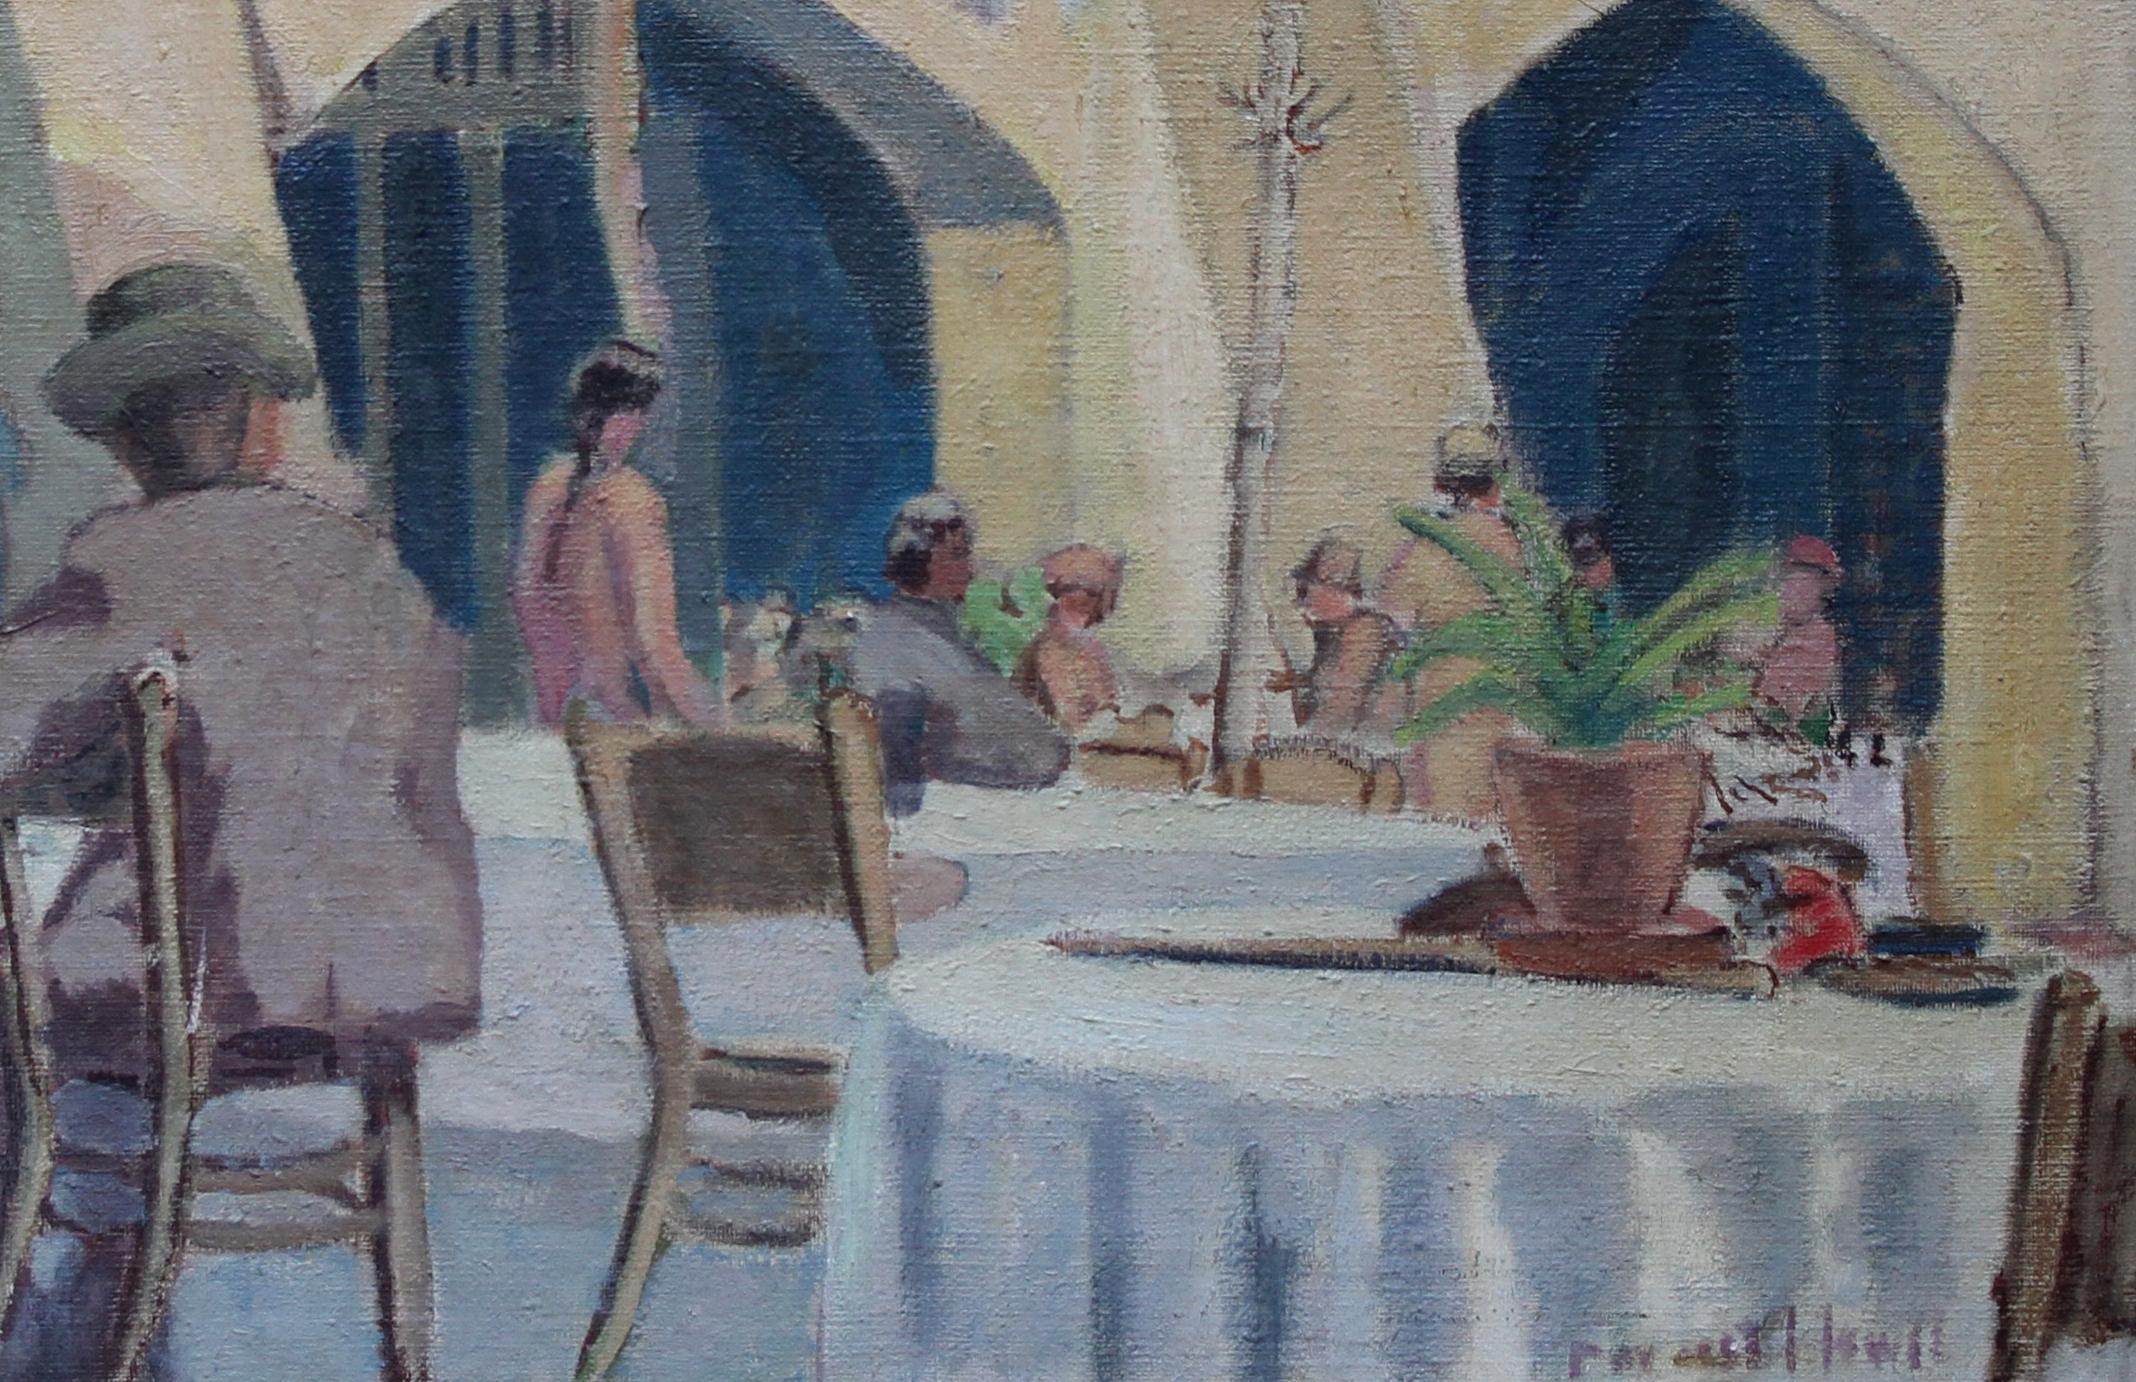 Cafe Porto Fino Italy - British Post Impressionist oil painting Italian Riviera - Post-Impressionist Painting by Forrest Hewit